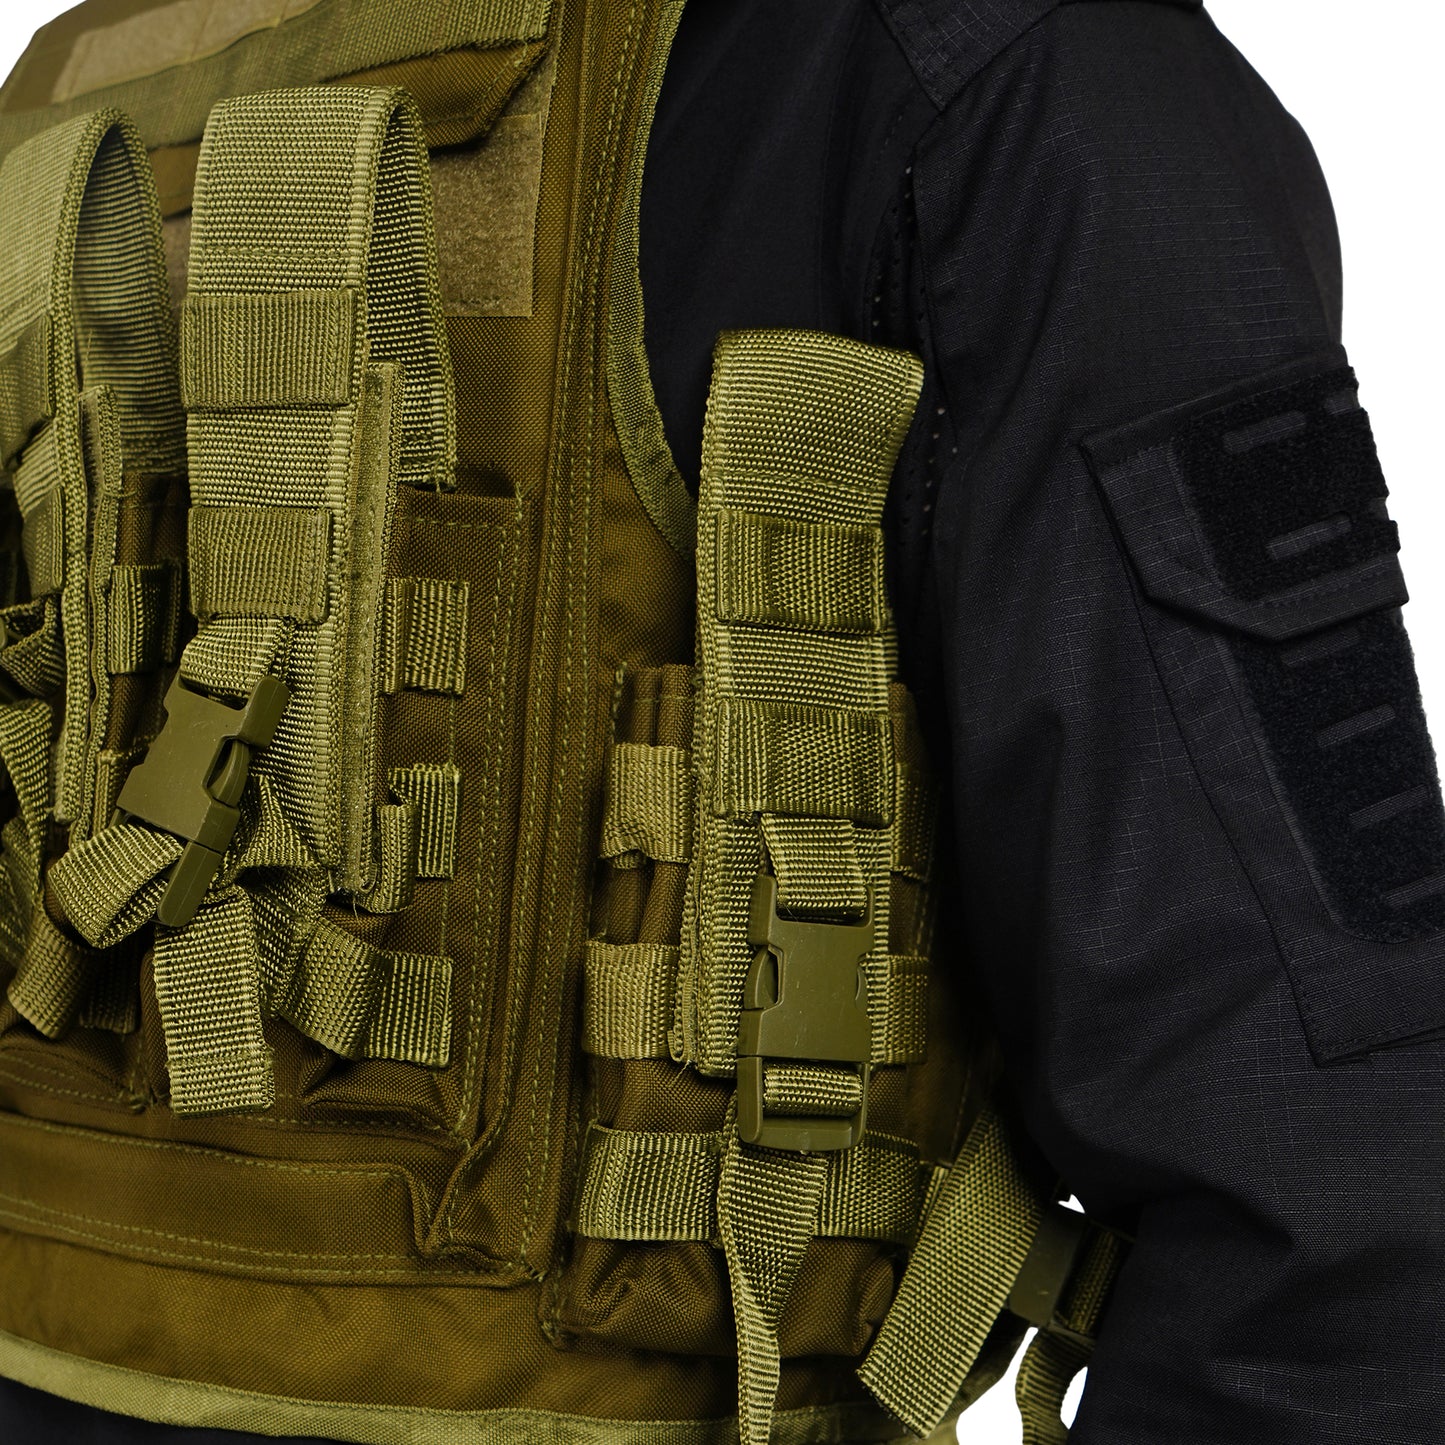 Tactical Vest Pouch with Bulletproof Jacket Cover - Premium Quality